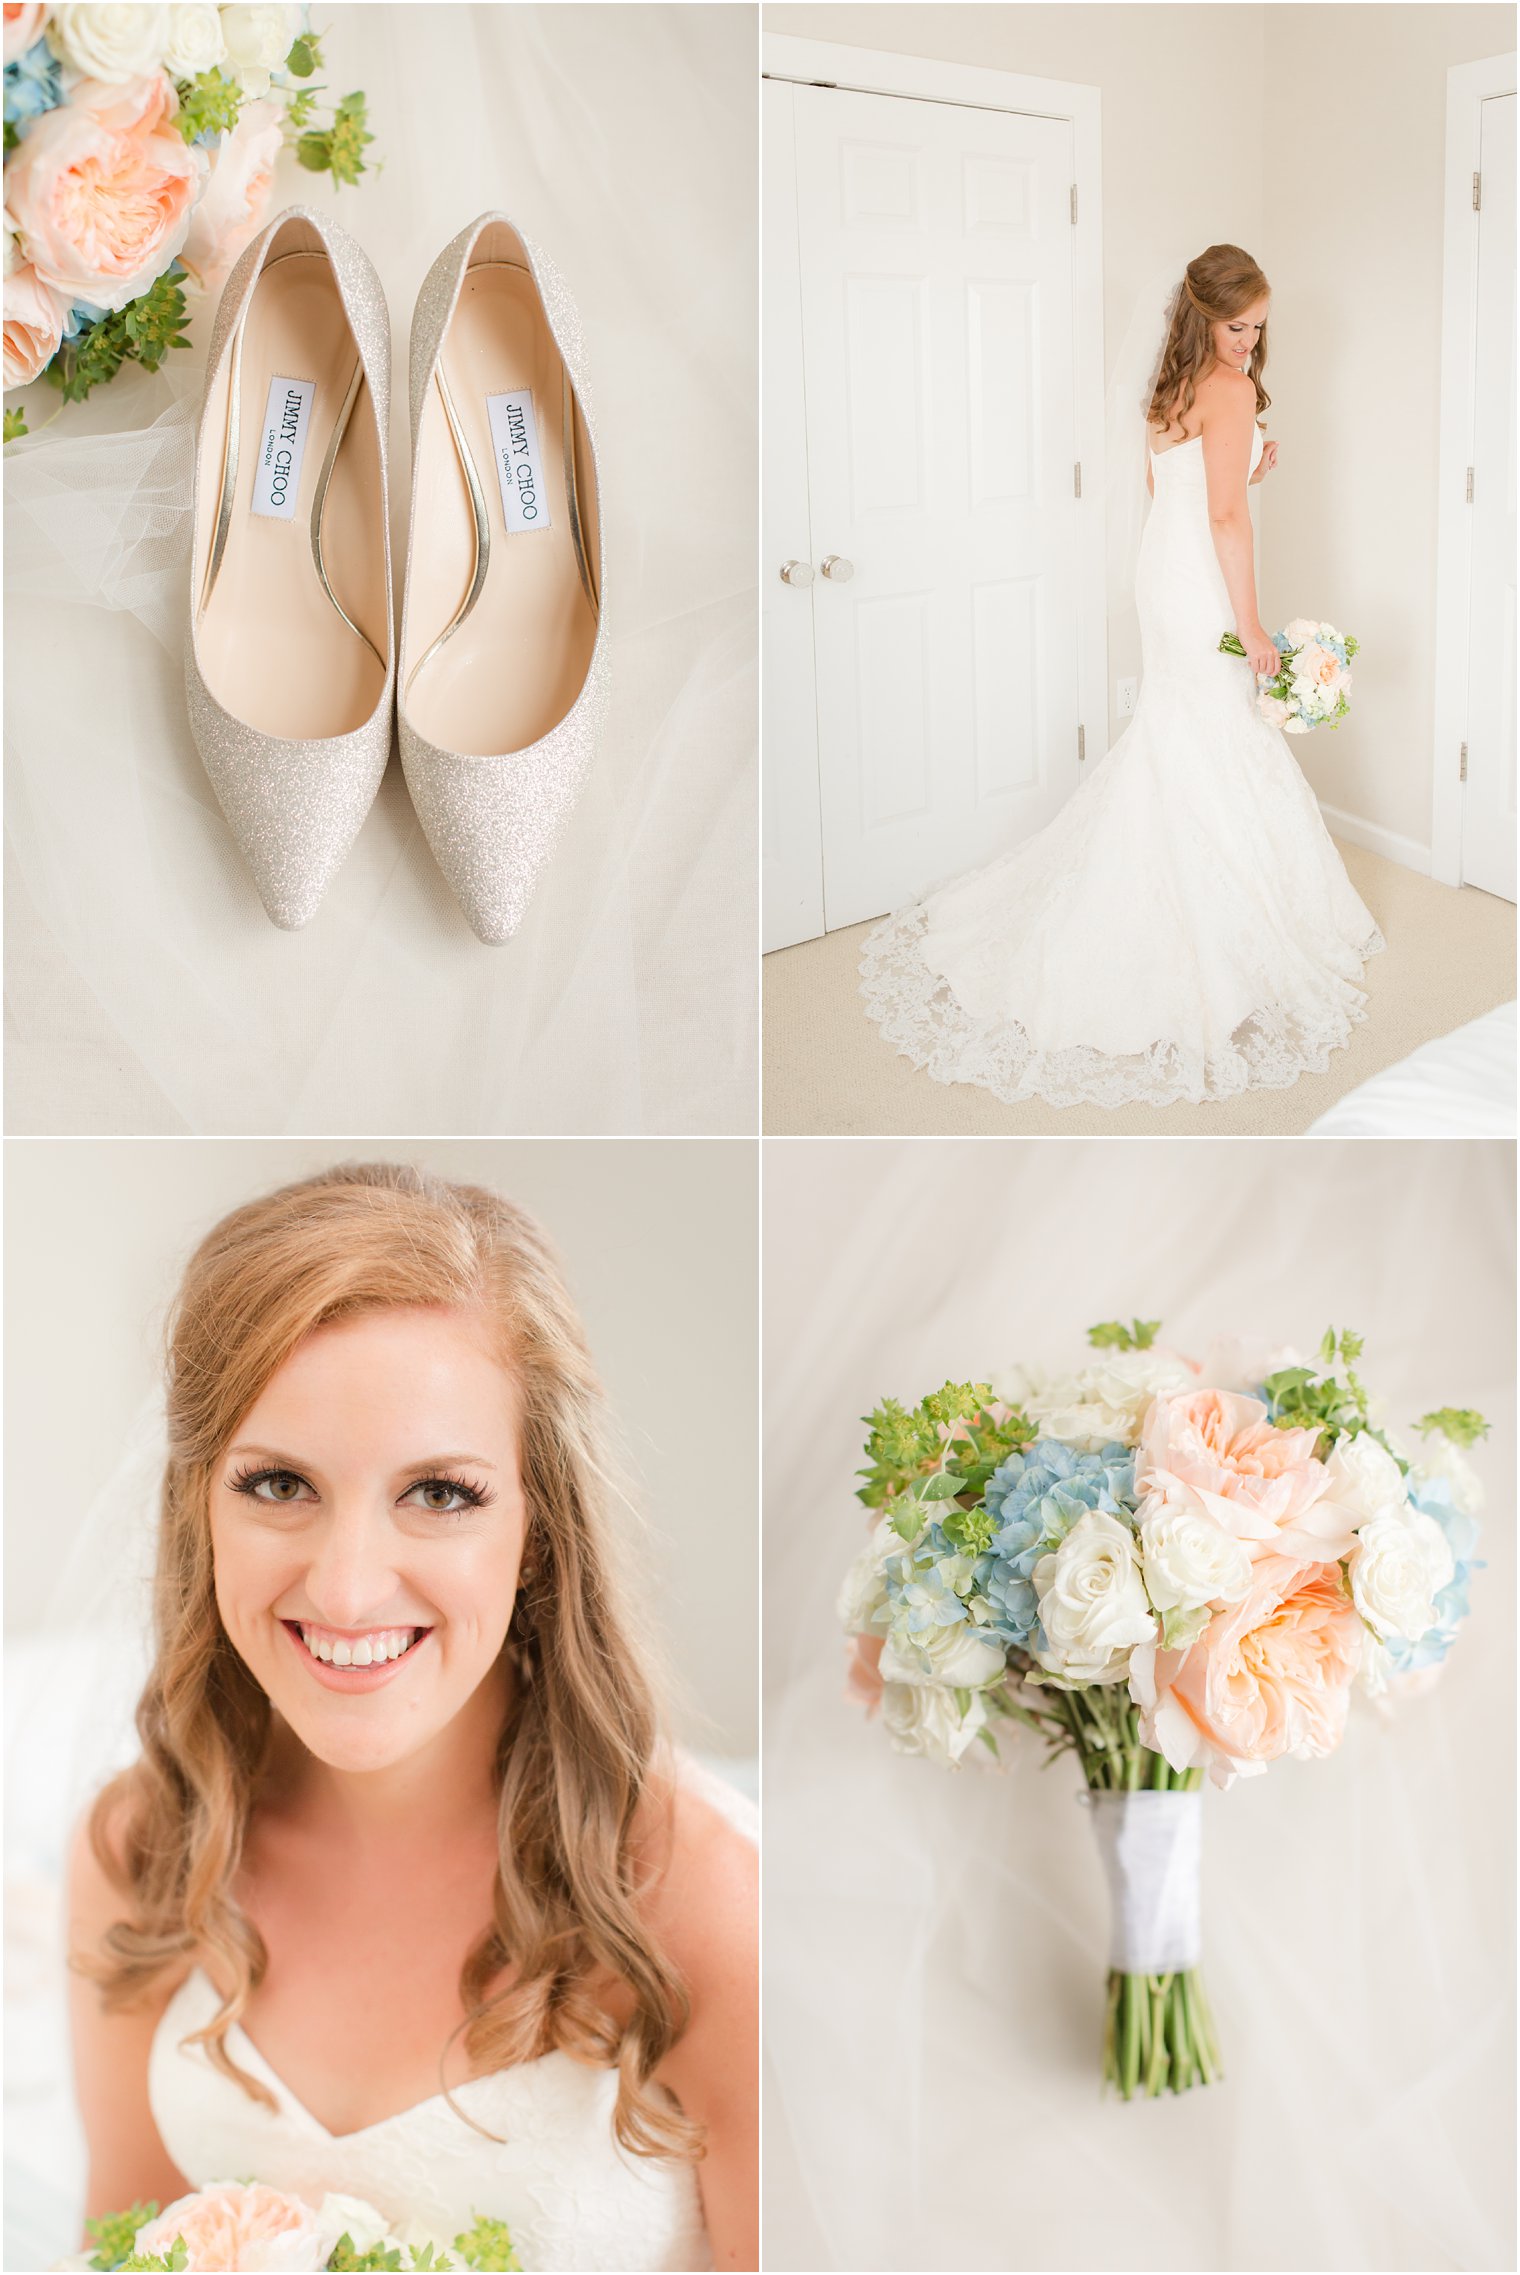 sparkle Jimmy Choo wedding flats with bridal details for Brant Beach Yacht Club wedding day photographed by Idalia Photography